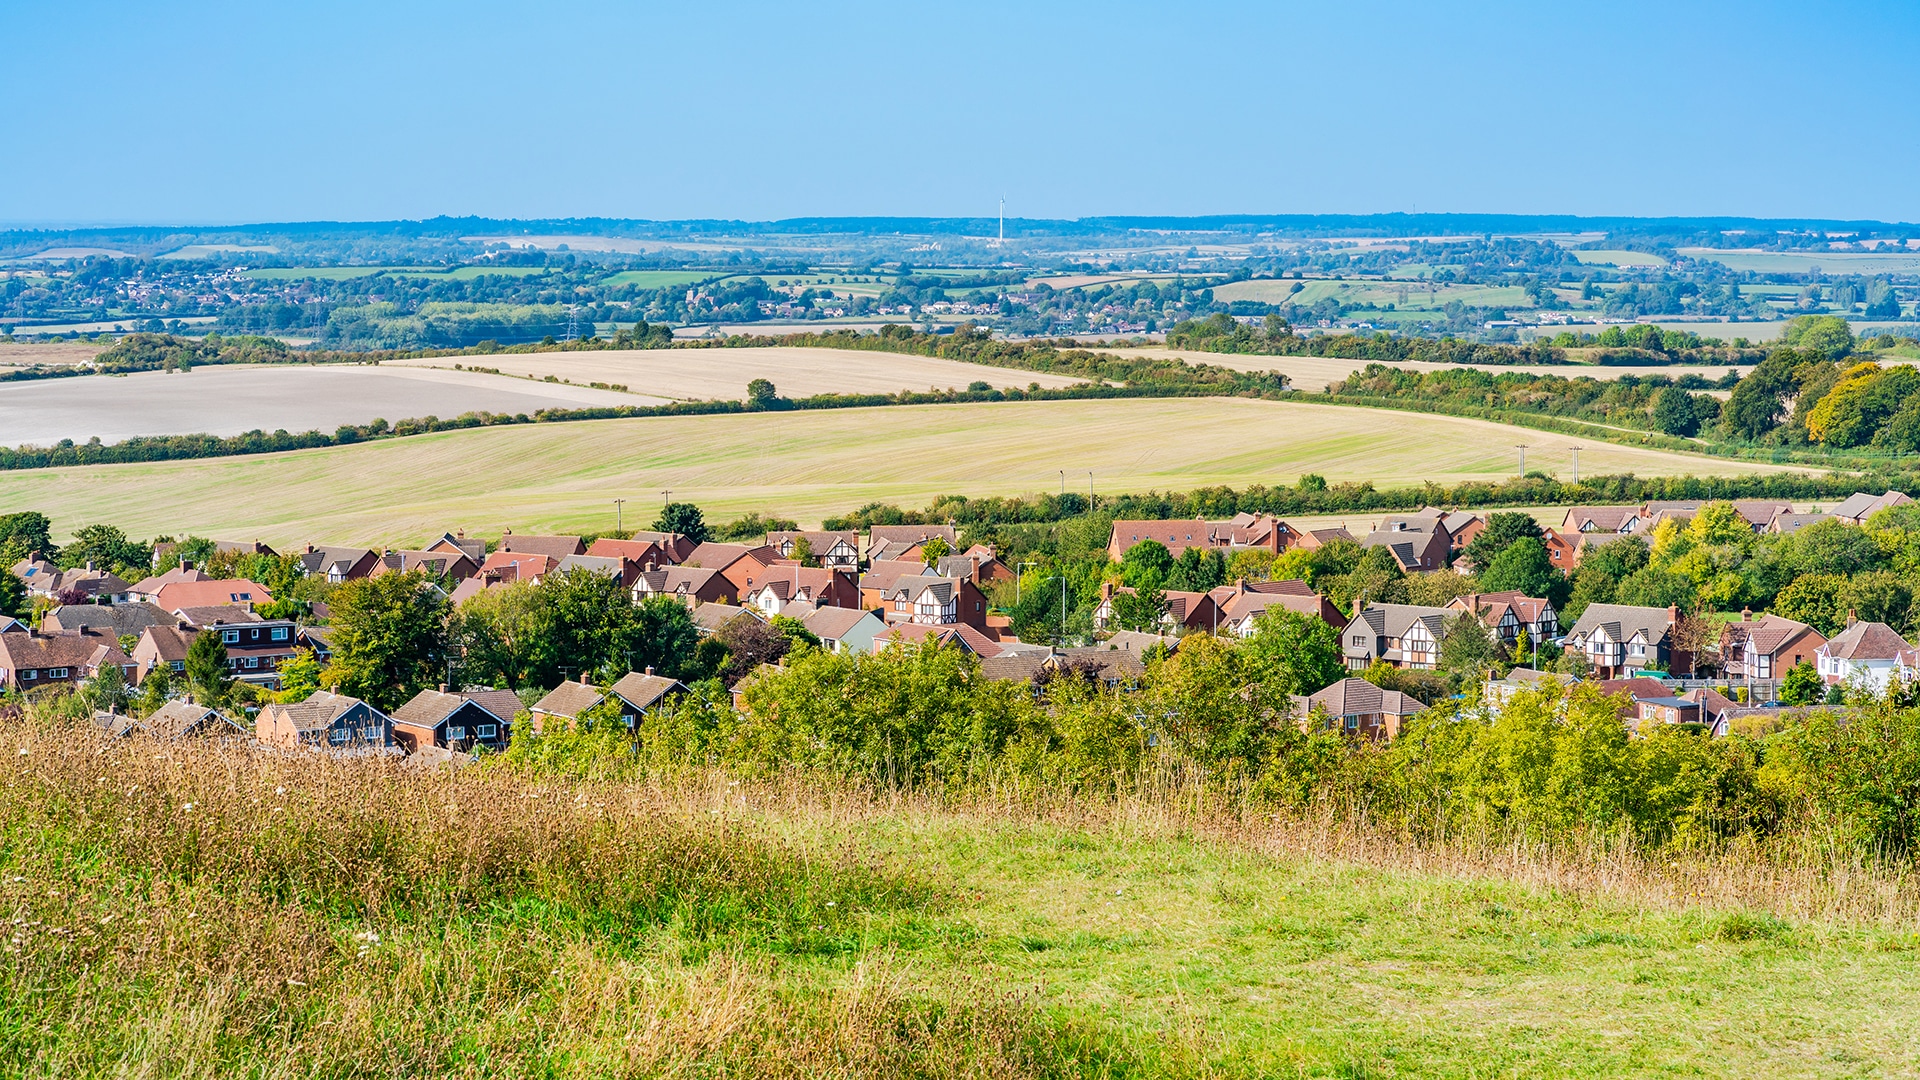 View of English countryside from Dunstable